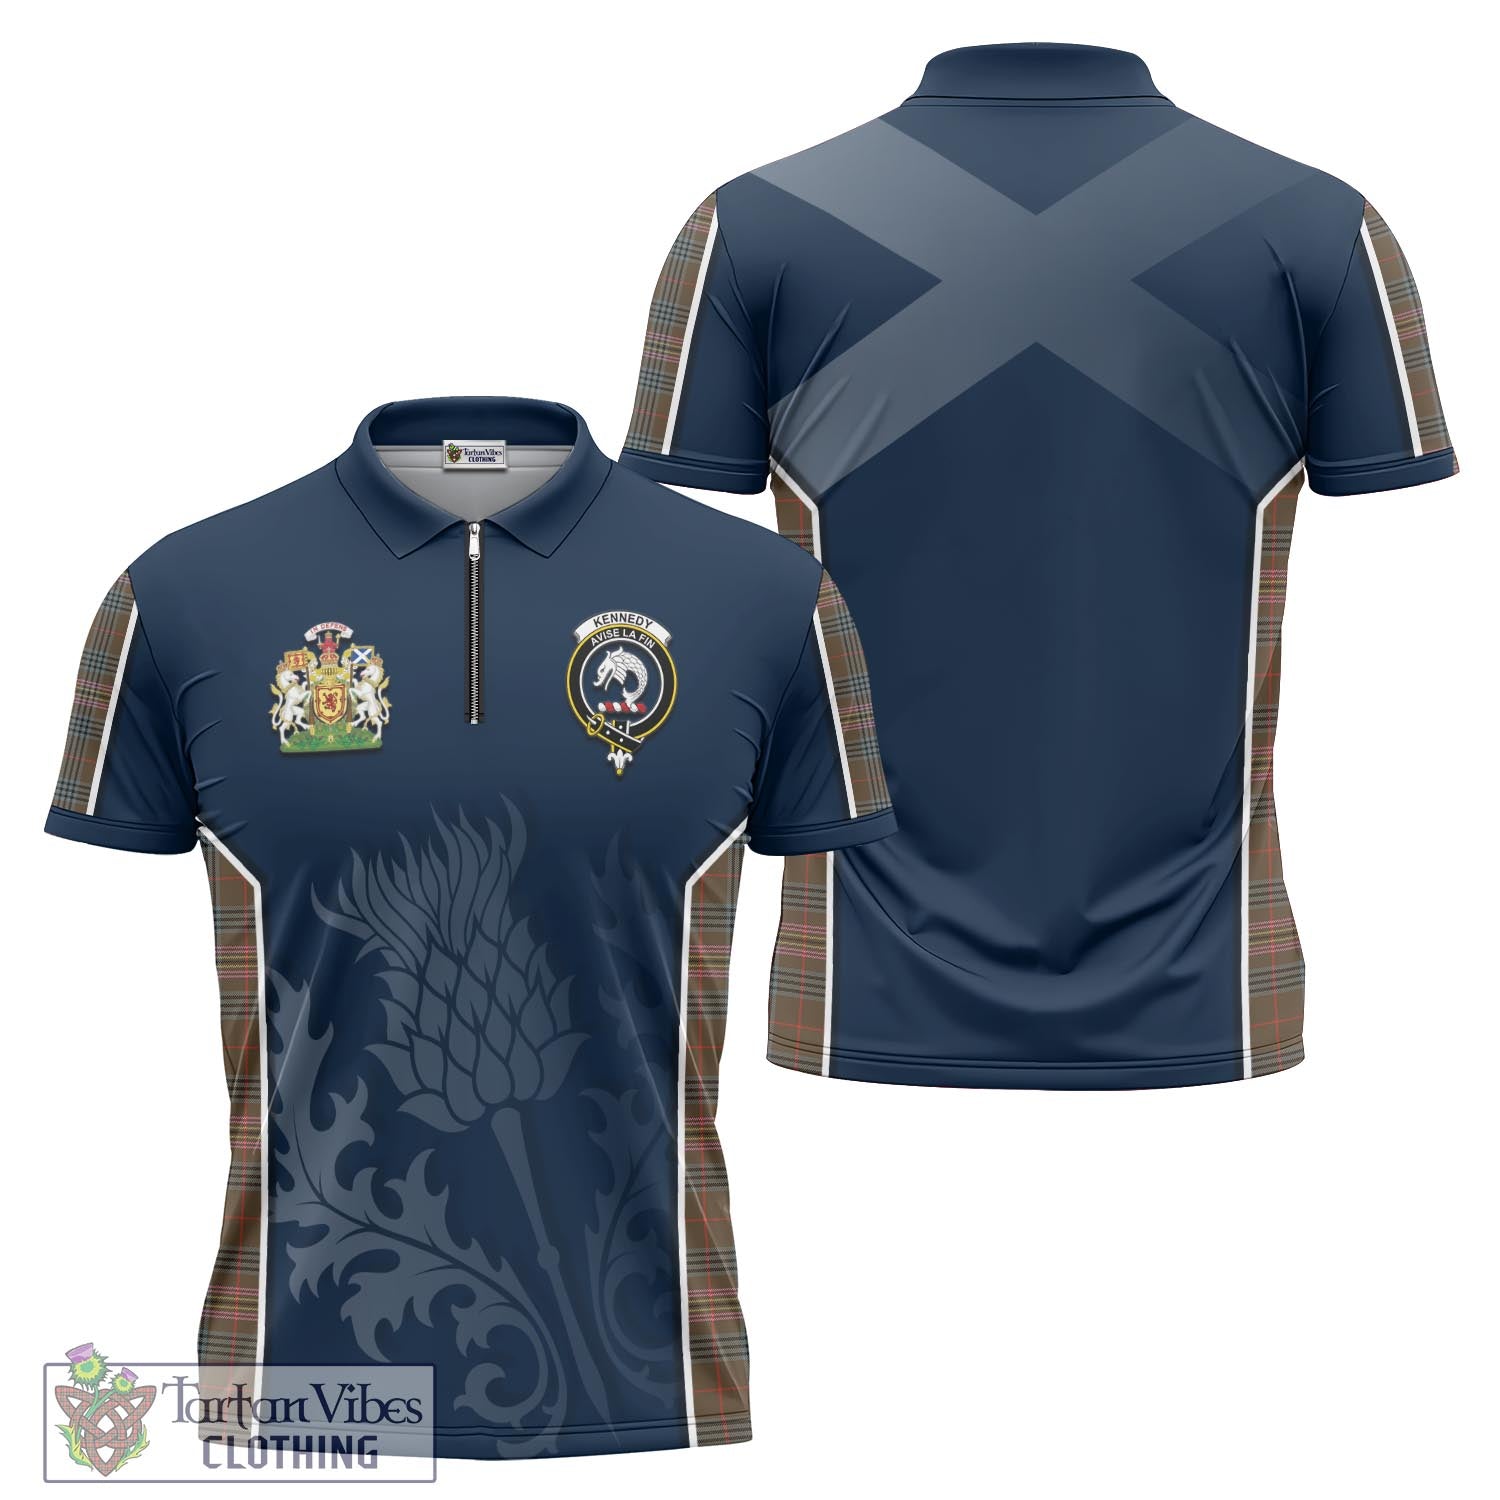 Tartan Vibes Clothing Kennedy Weathered Tartan Zipper Polo Shirt with Family Crest and Scottish Thistle Vibes Sport Style